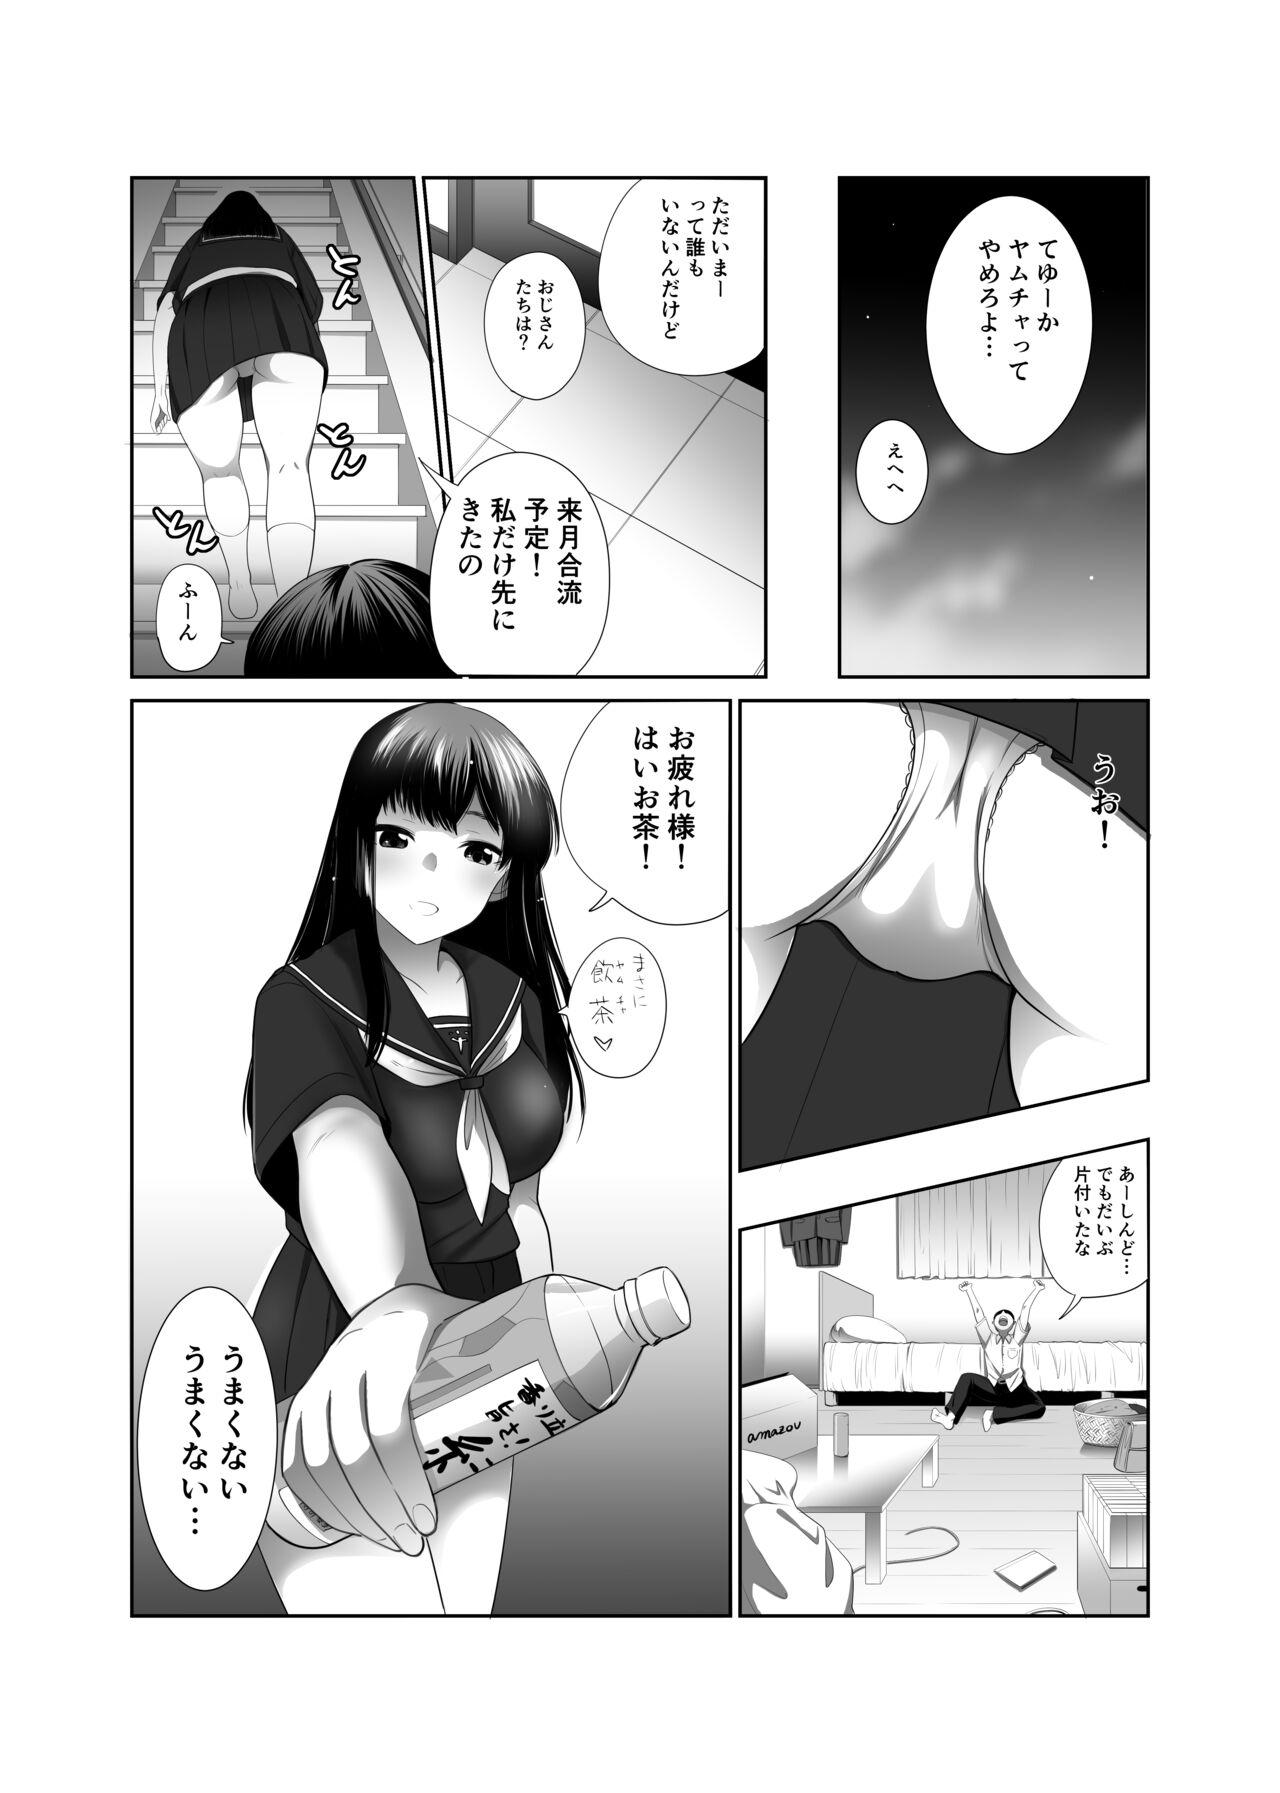 One 帰国した幼なじみを孕ませる Fetiche - Page 8